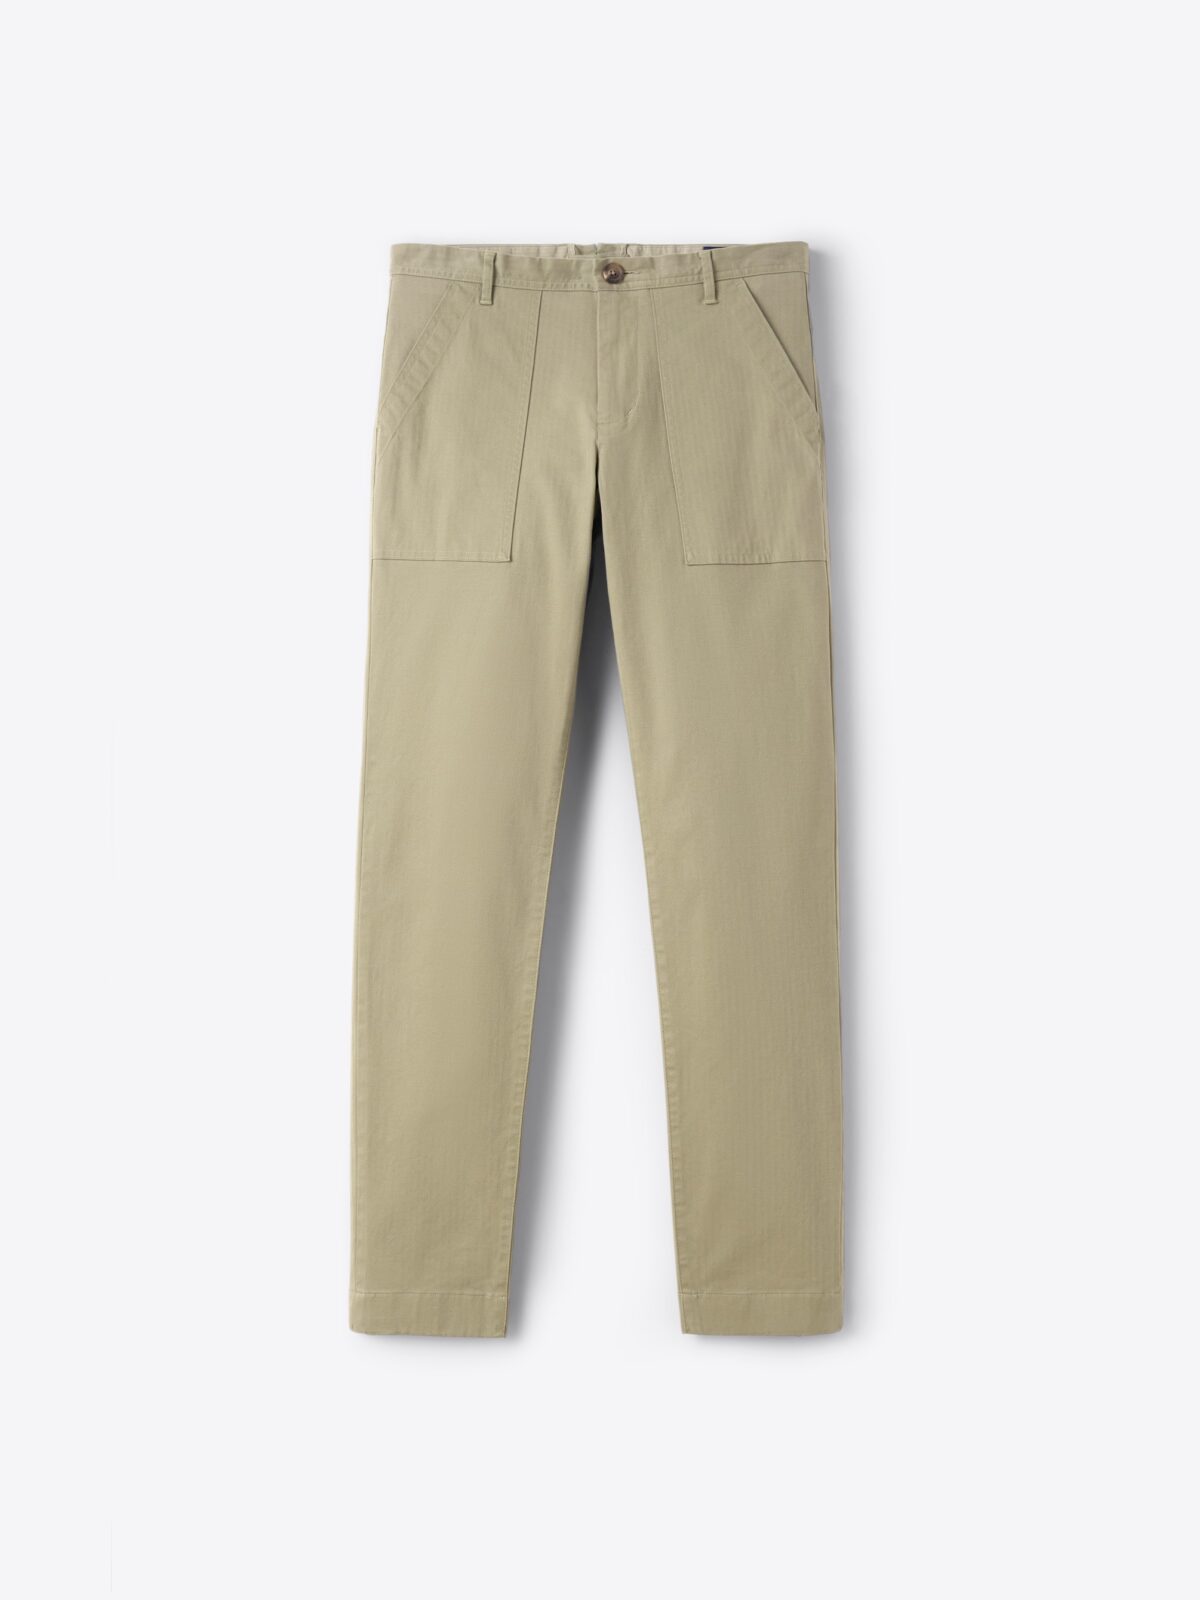 UNIQLO Malaysia - Our Warm Lined Pants feature 2-way